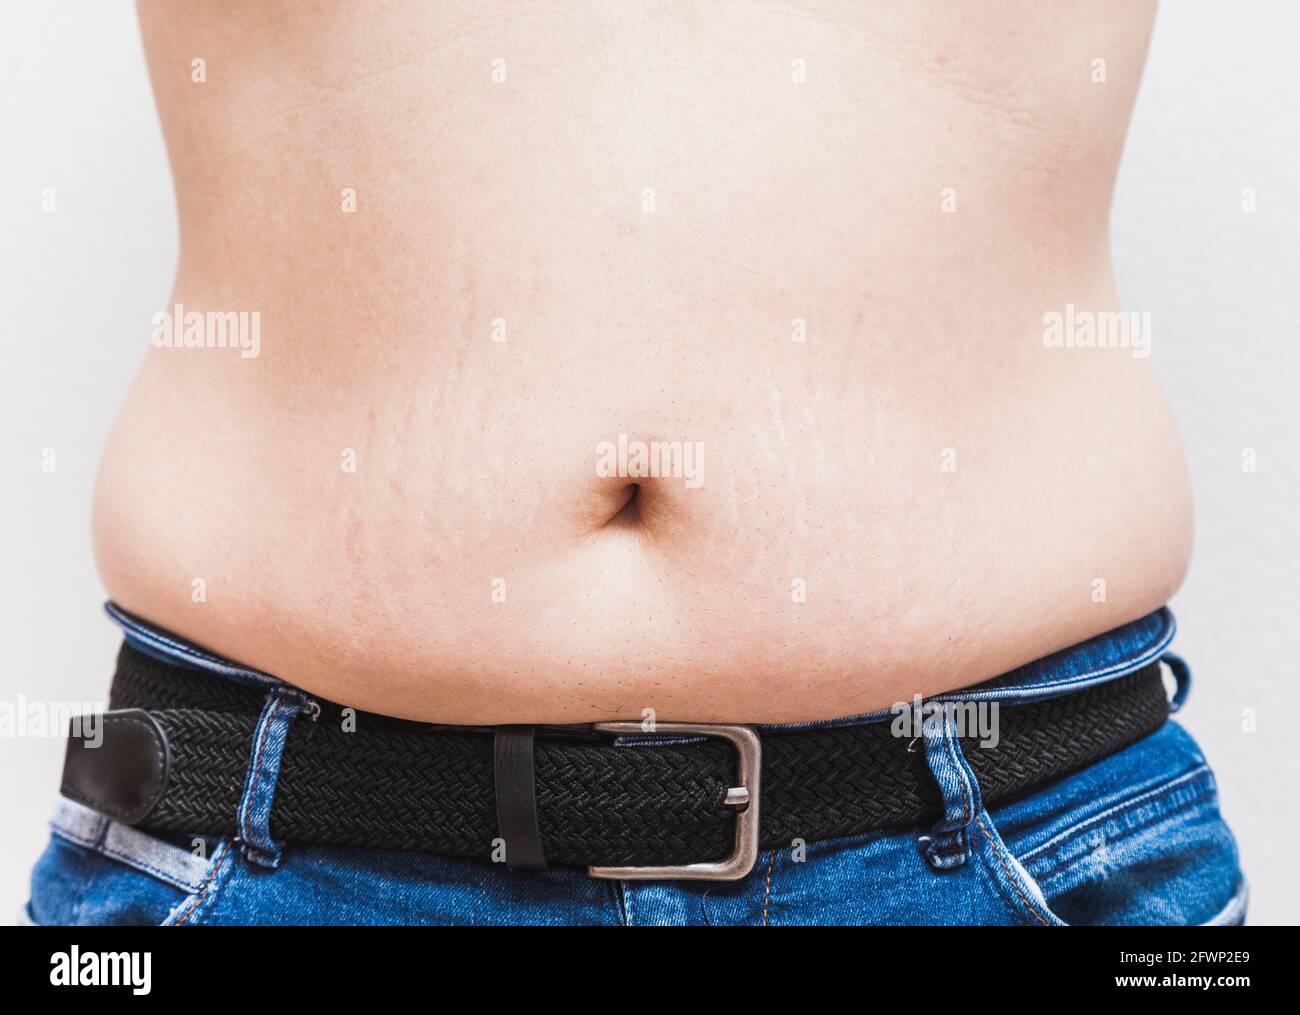 The belly and navel of an unrecognizable fat man wearing blue jeans and a black  belt Stock Photo - Alamy